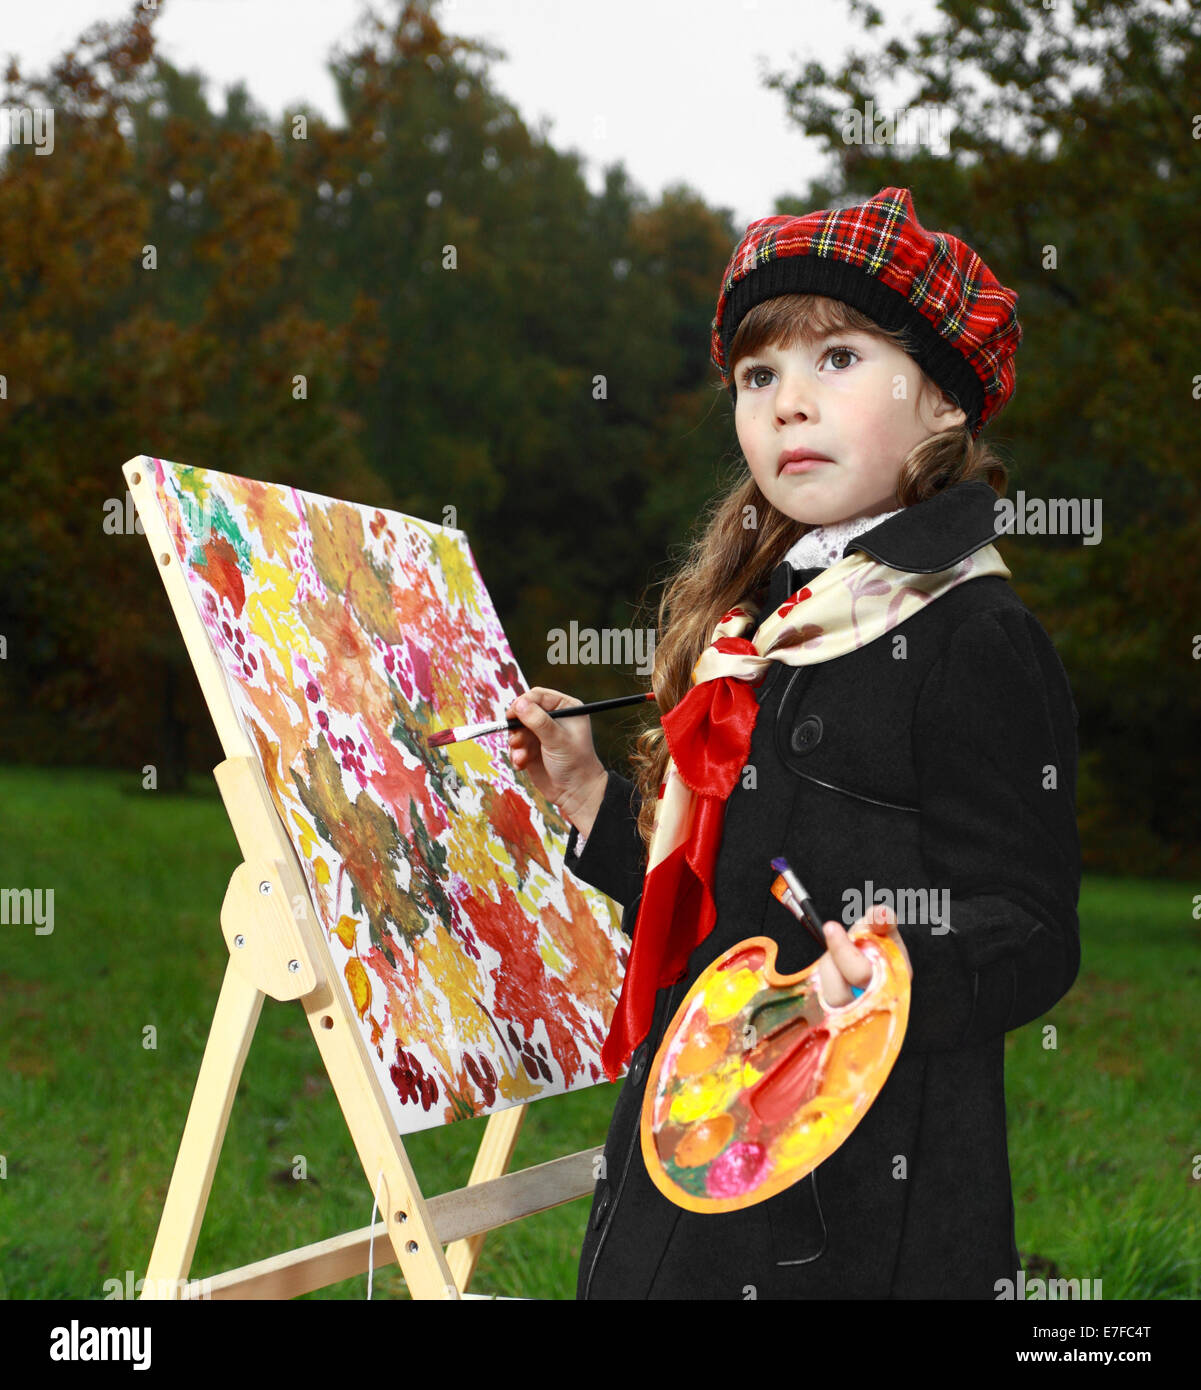 Spring draws autumn. Genre portrait of young girl painter outdoors Stock Photo